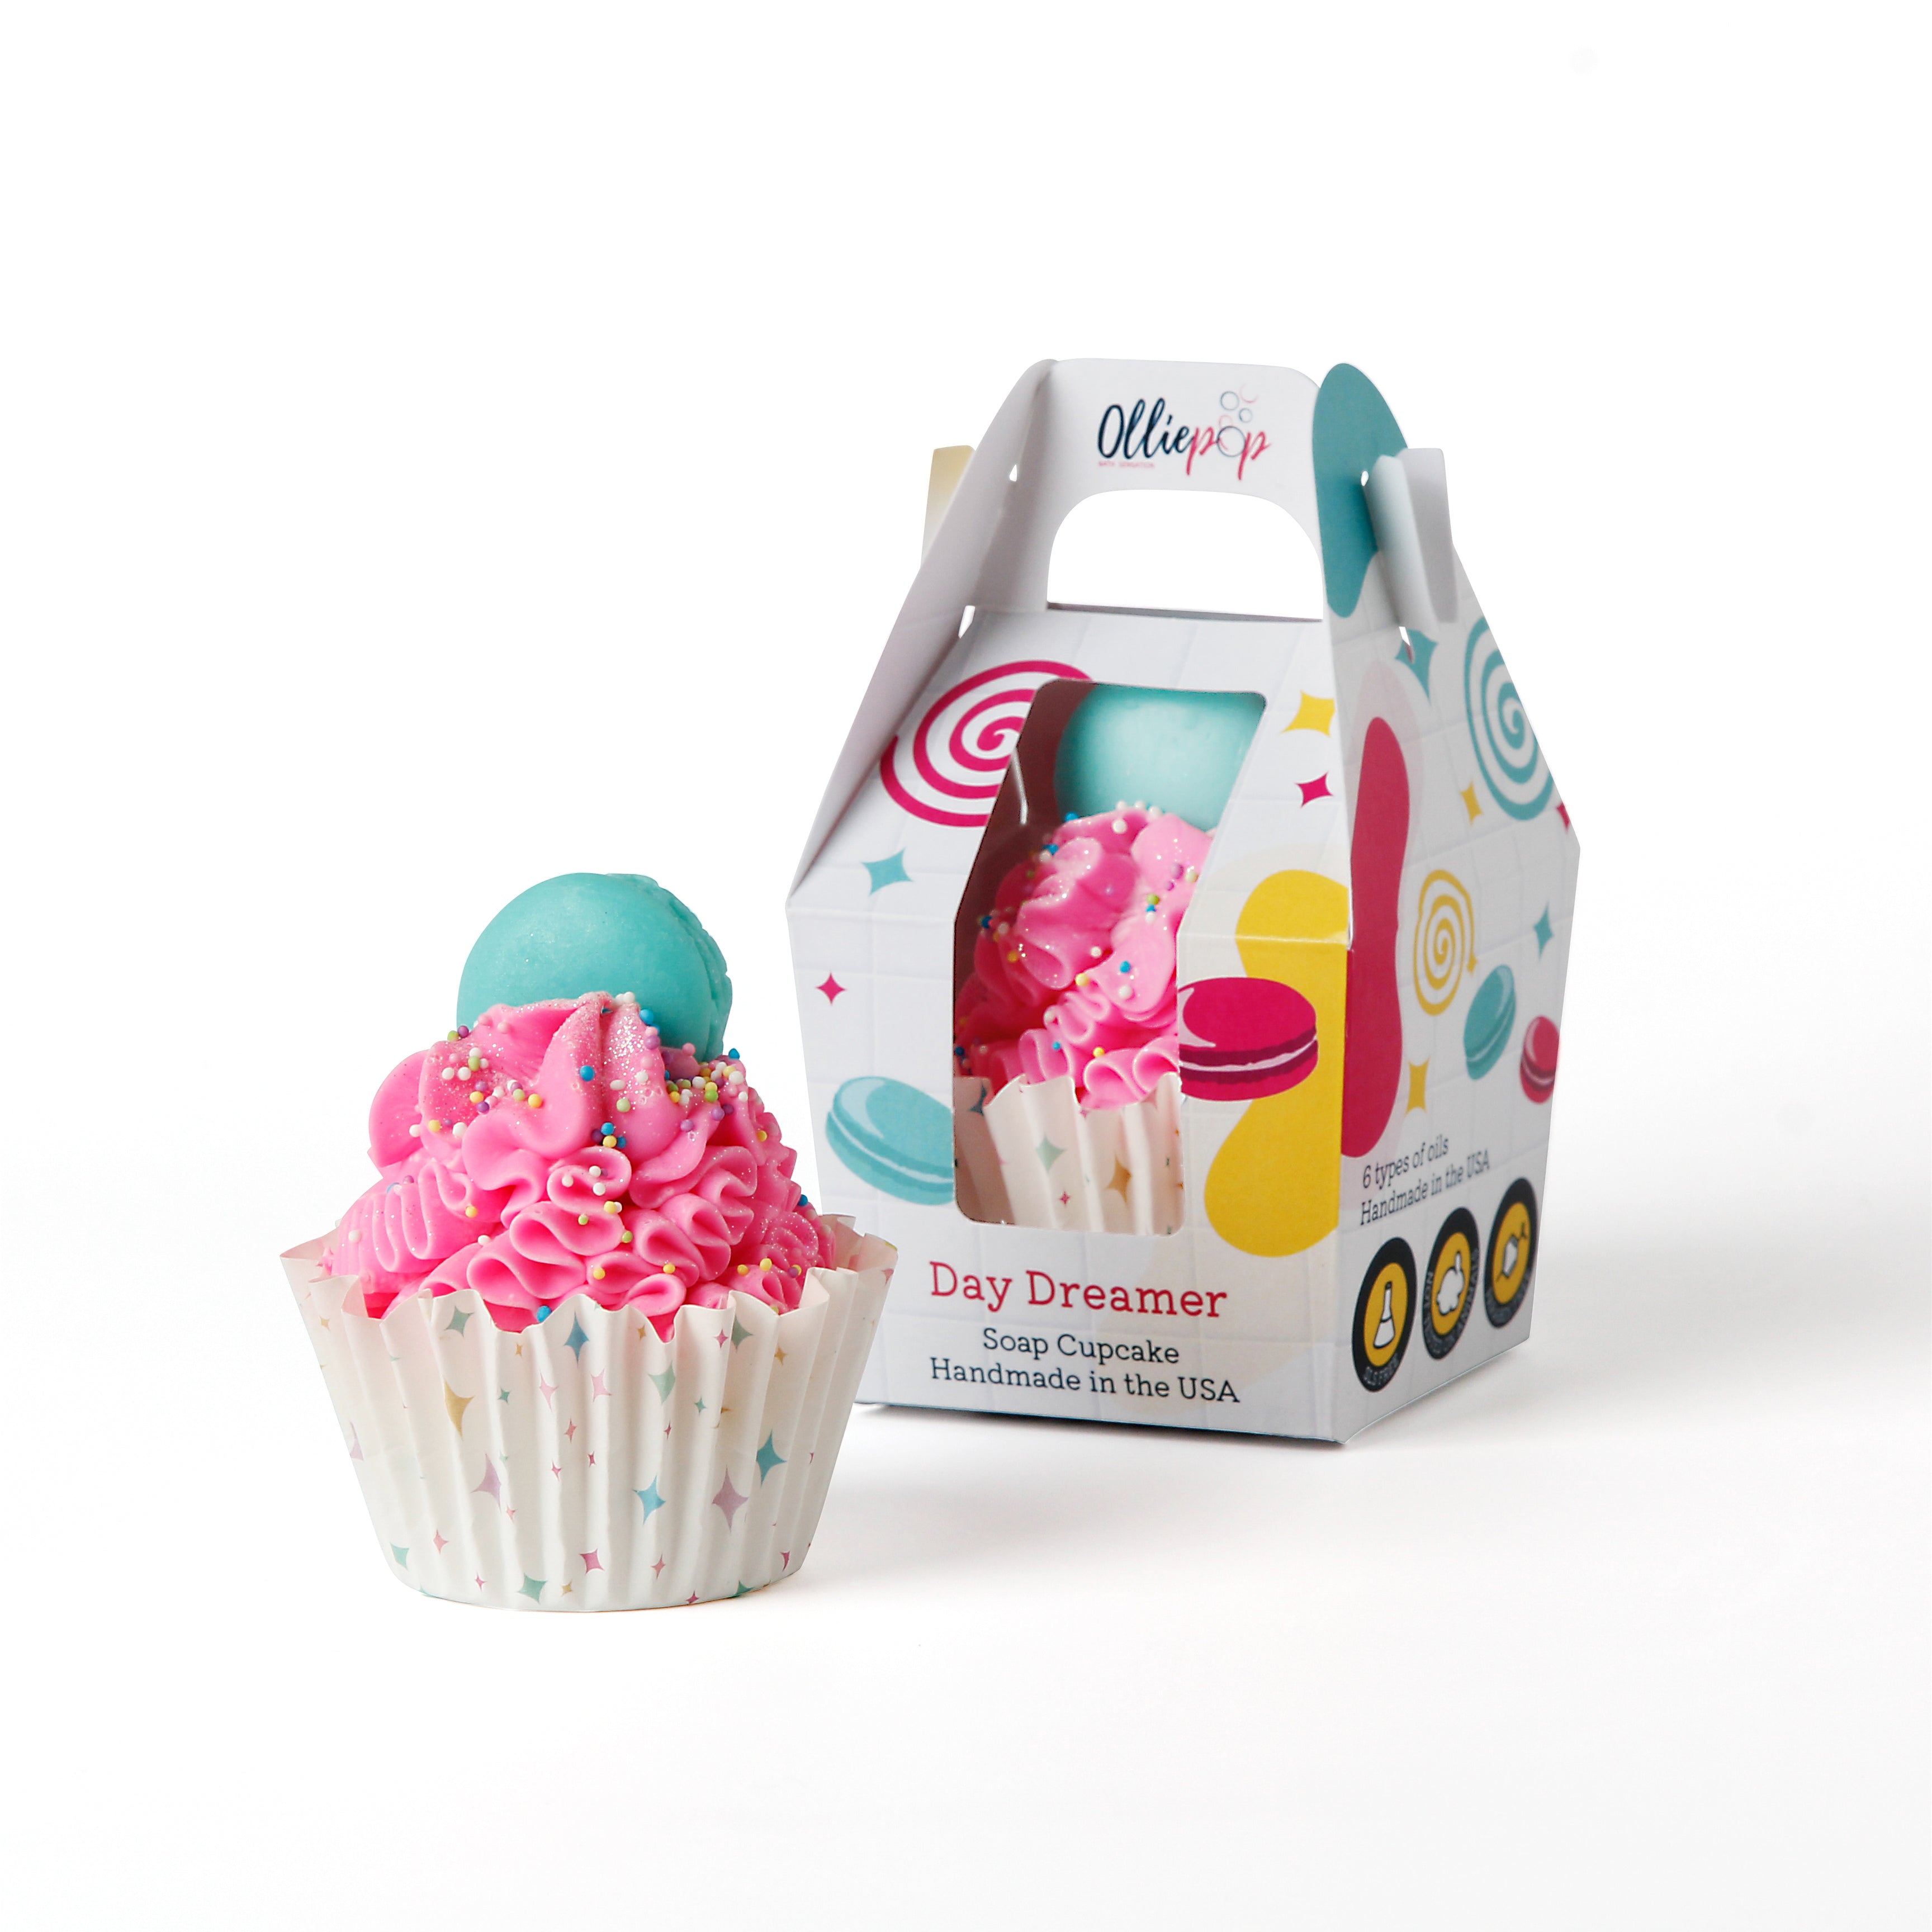 Hot pink soap cupcake with glitter and sprinkles on top, with a light blue macaron cookie. Packaged with our customized Olliepop packaging that is perfect for gifts.